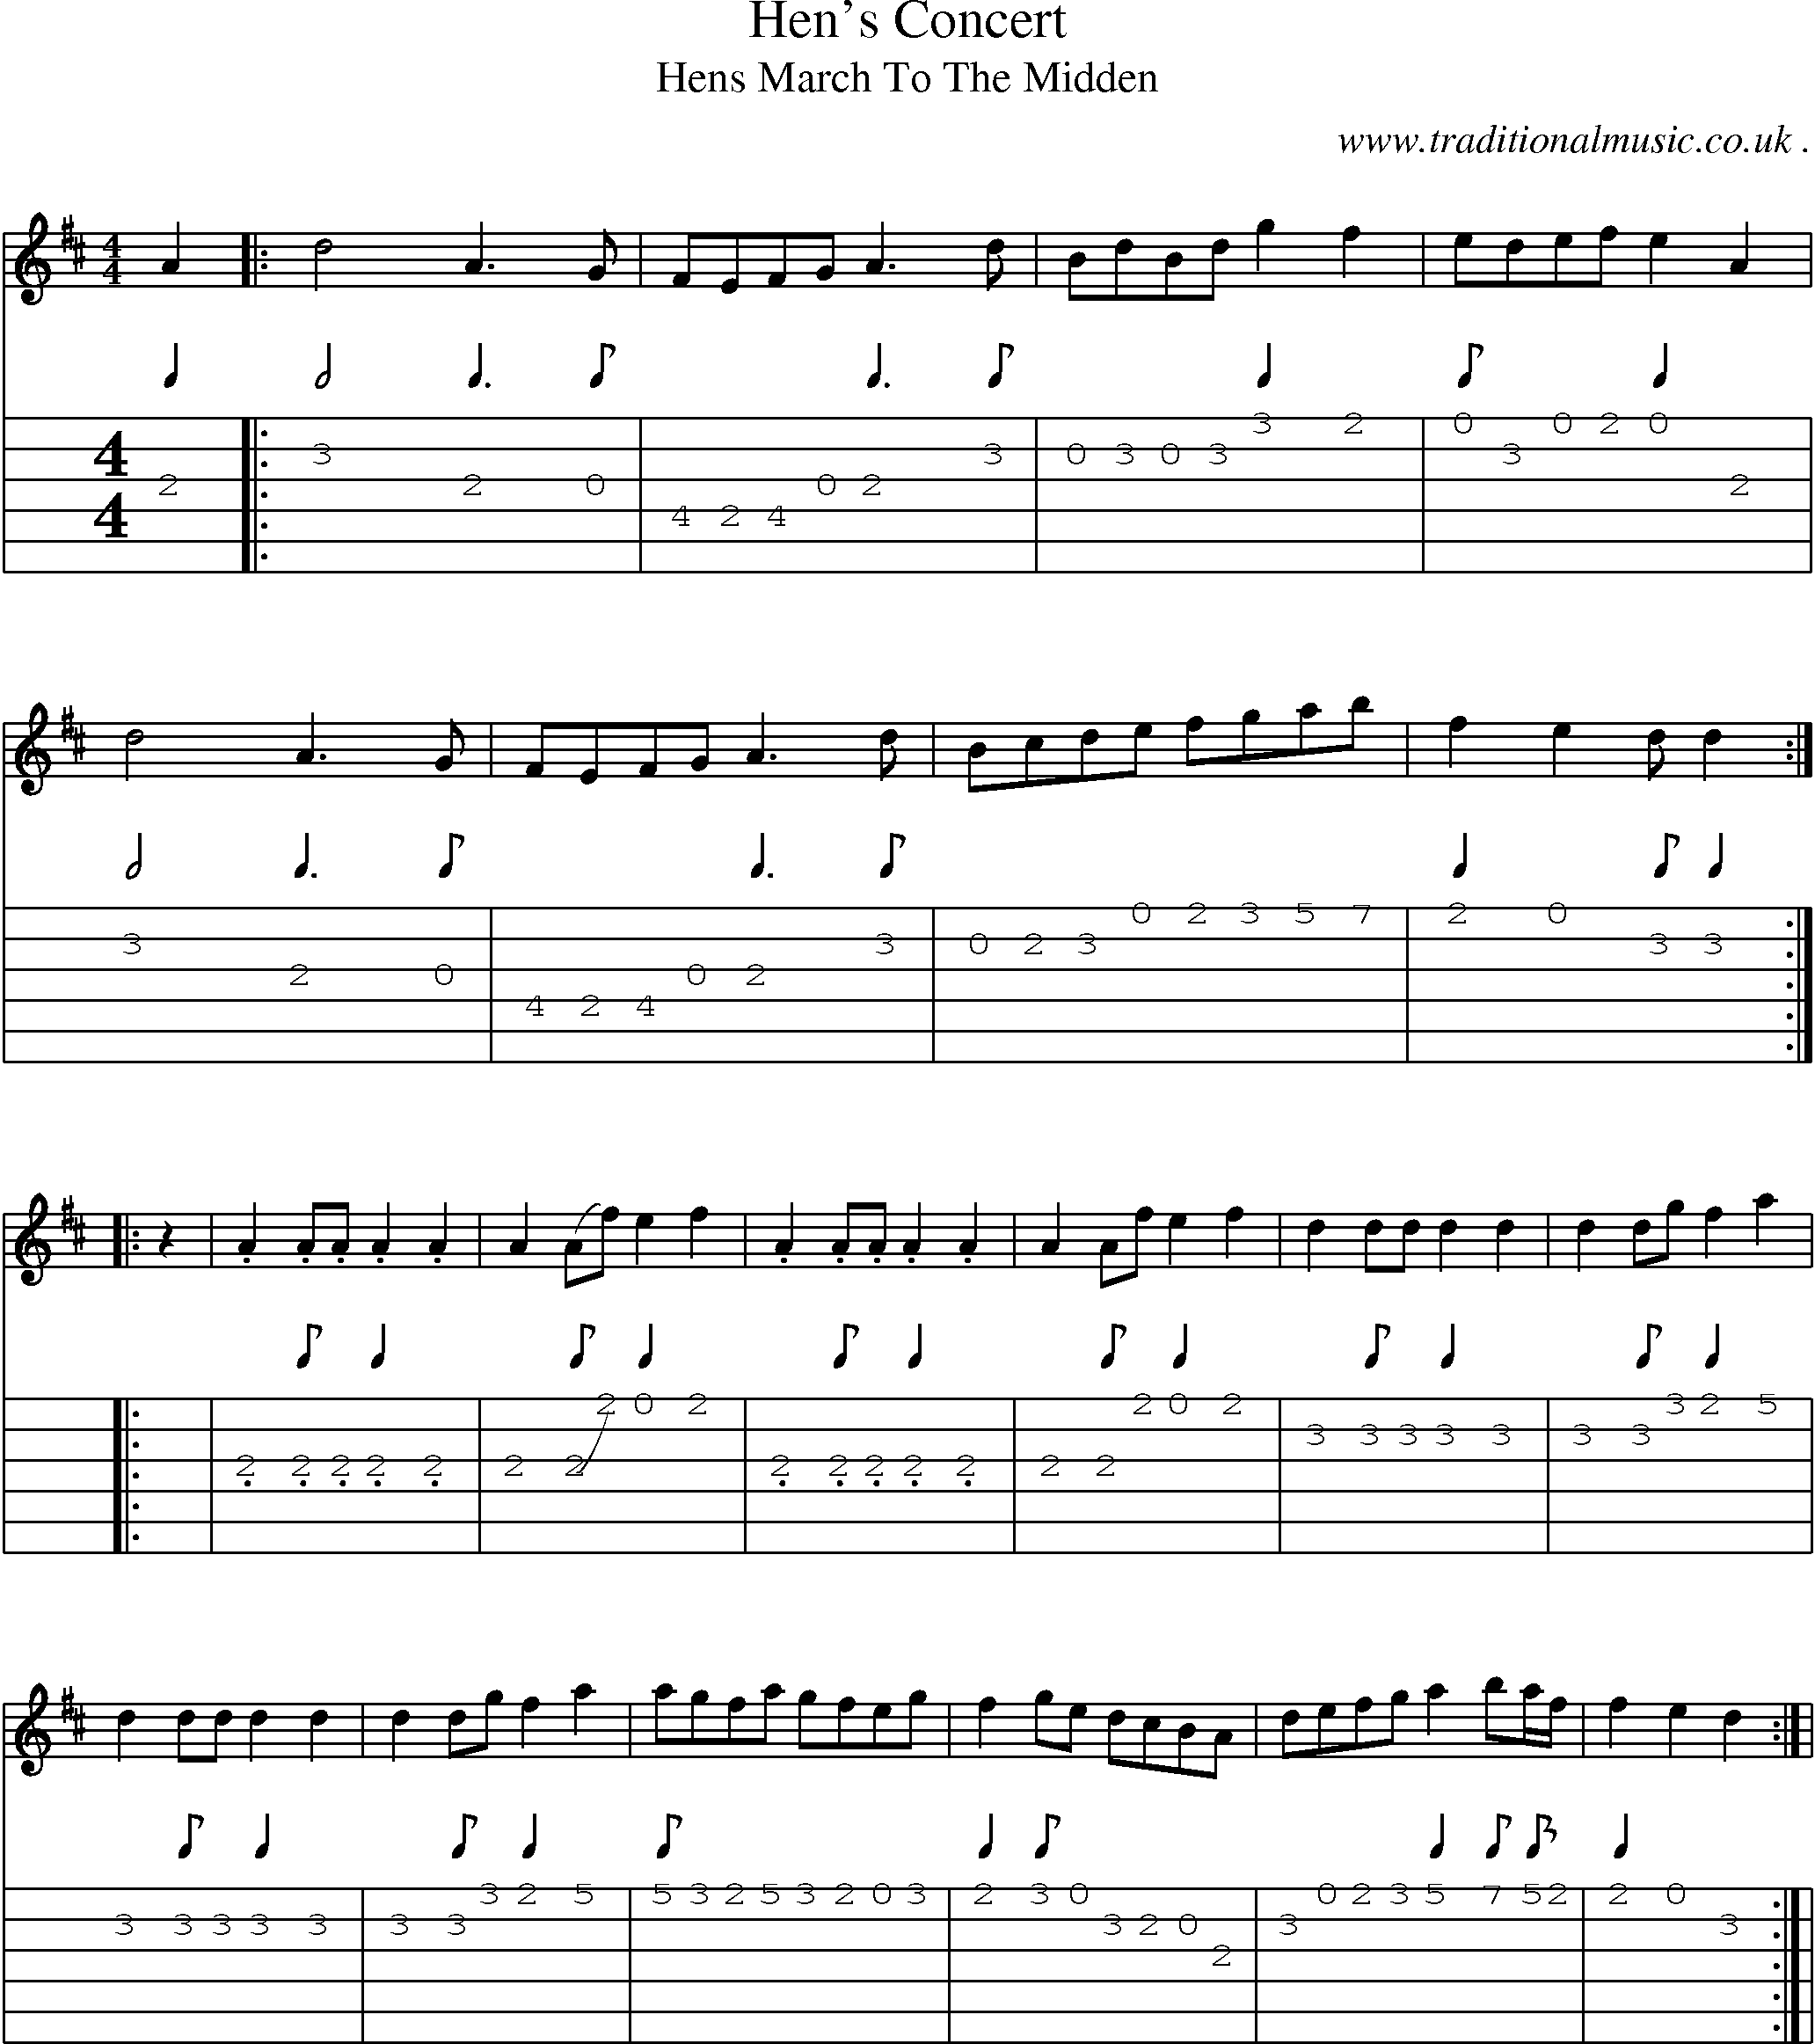 Sheet-Music and Guitar Tabs for Hens Concert